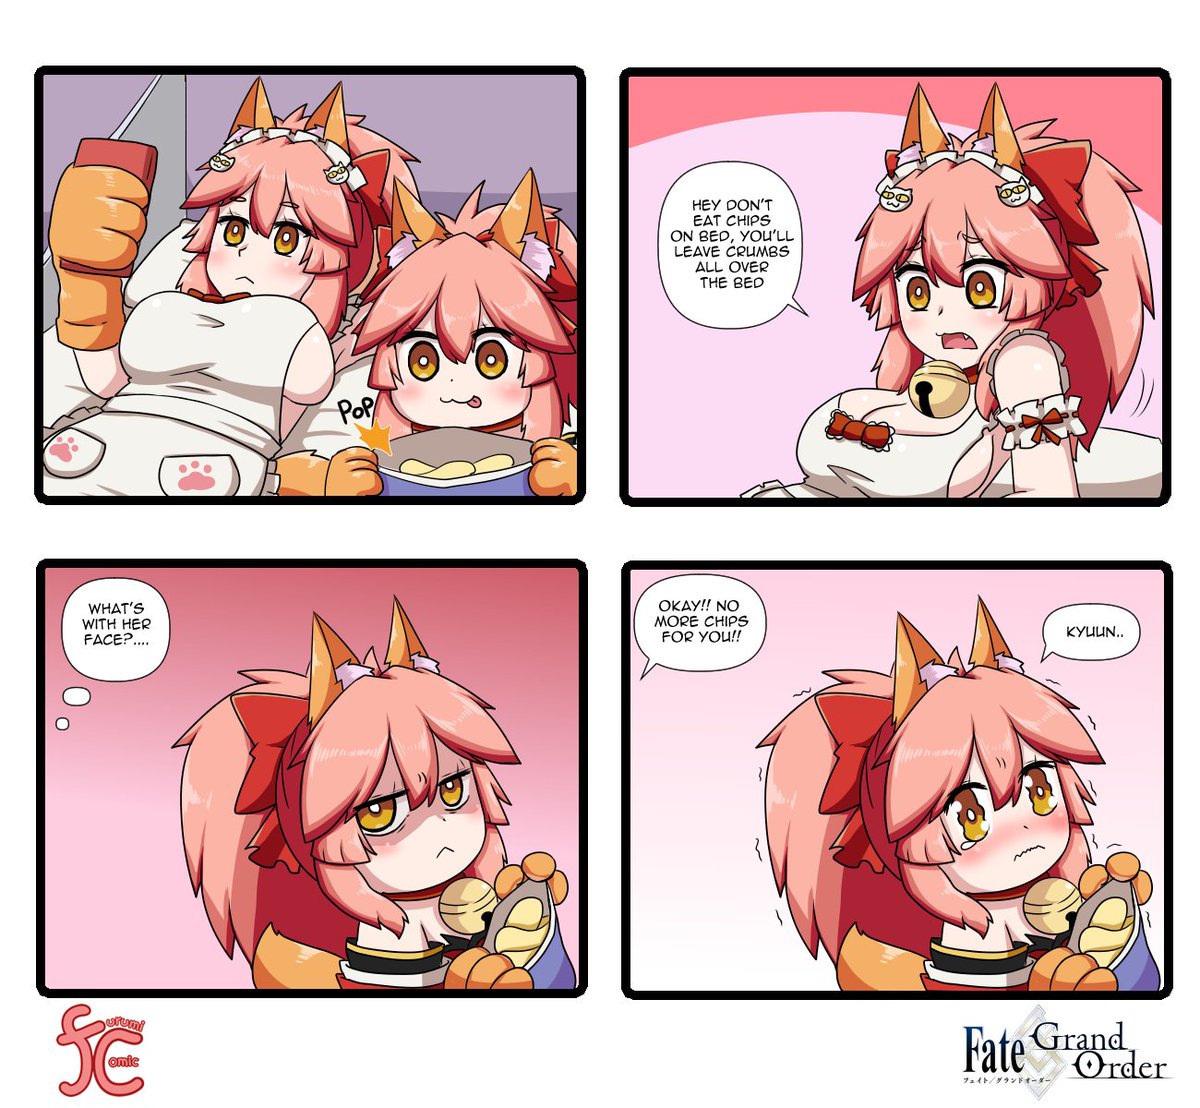 A Crumbs.
#FGO #FateGO #タマモキャット 